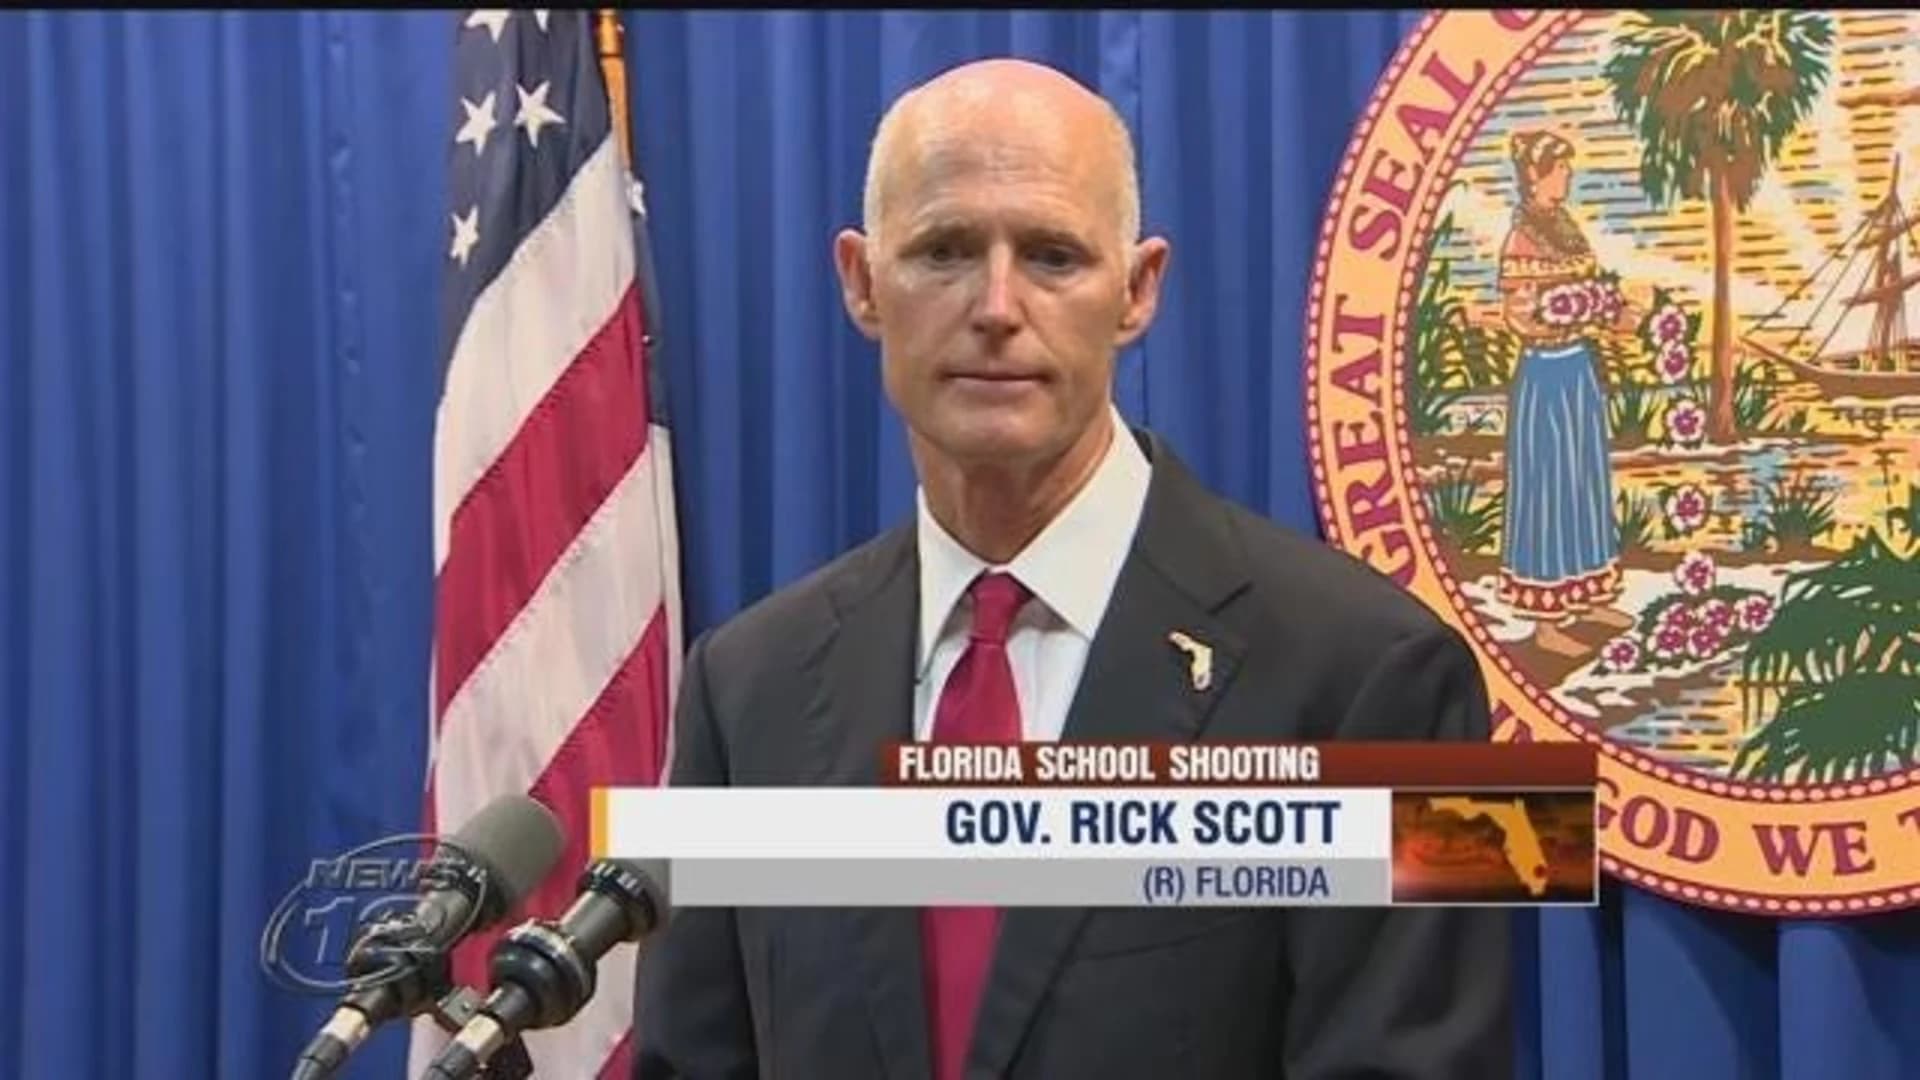 After school shooting, Florida leaders propose new gun laws